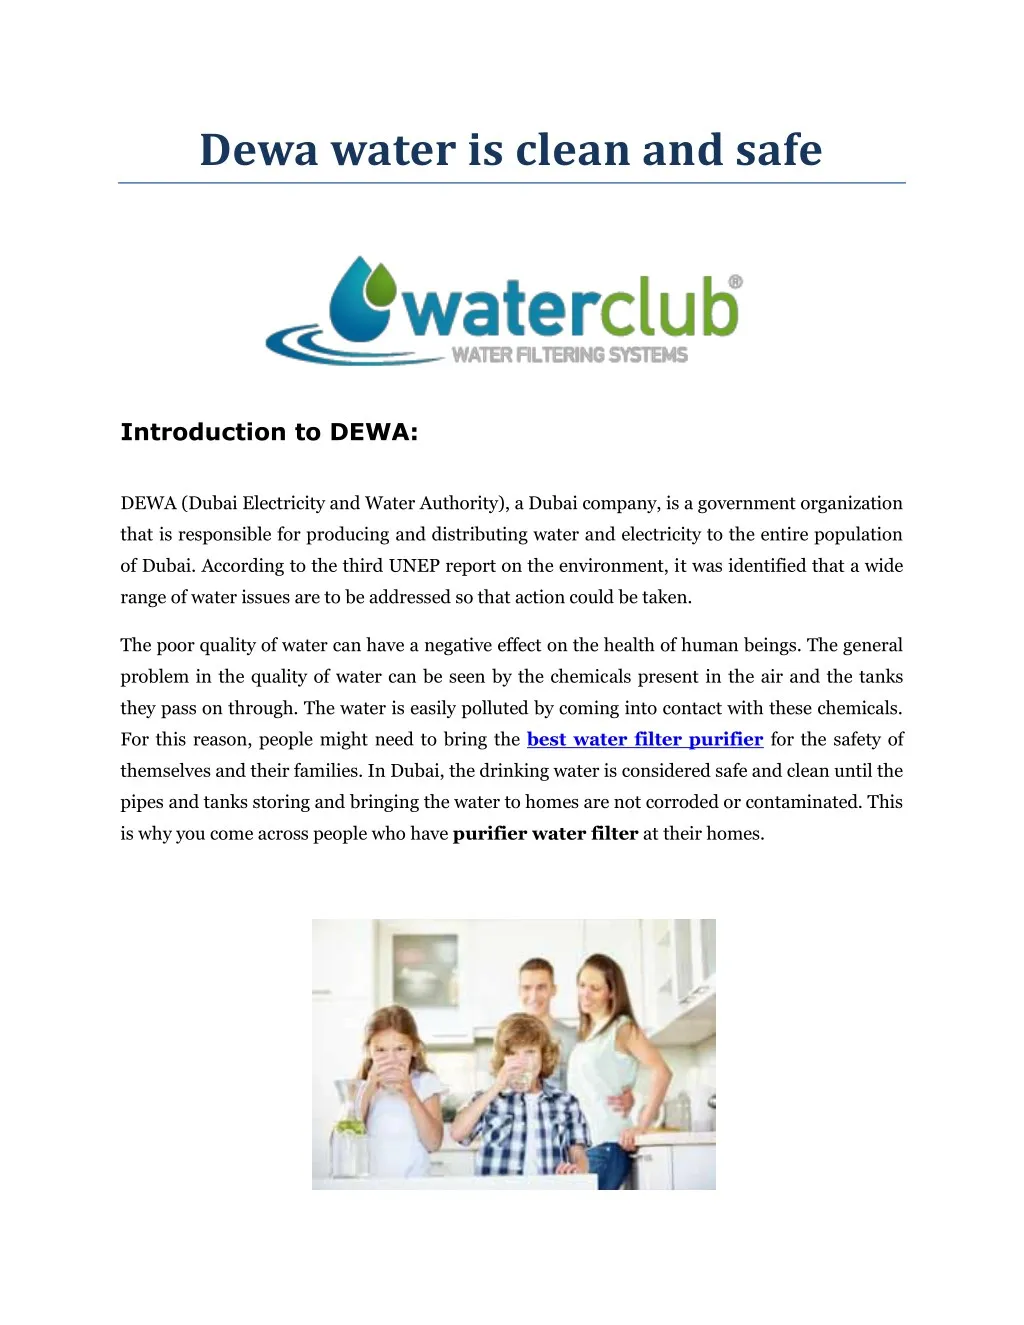 dewa water is clean and safe